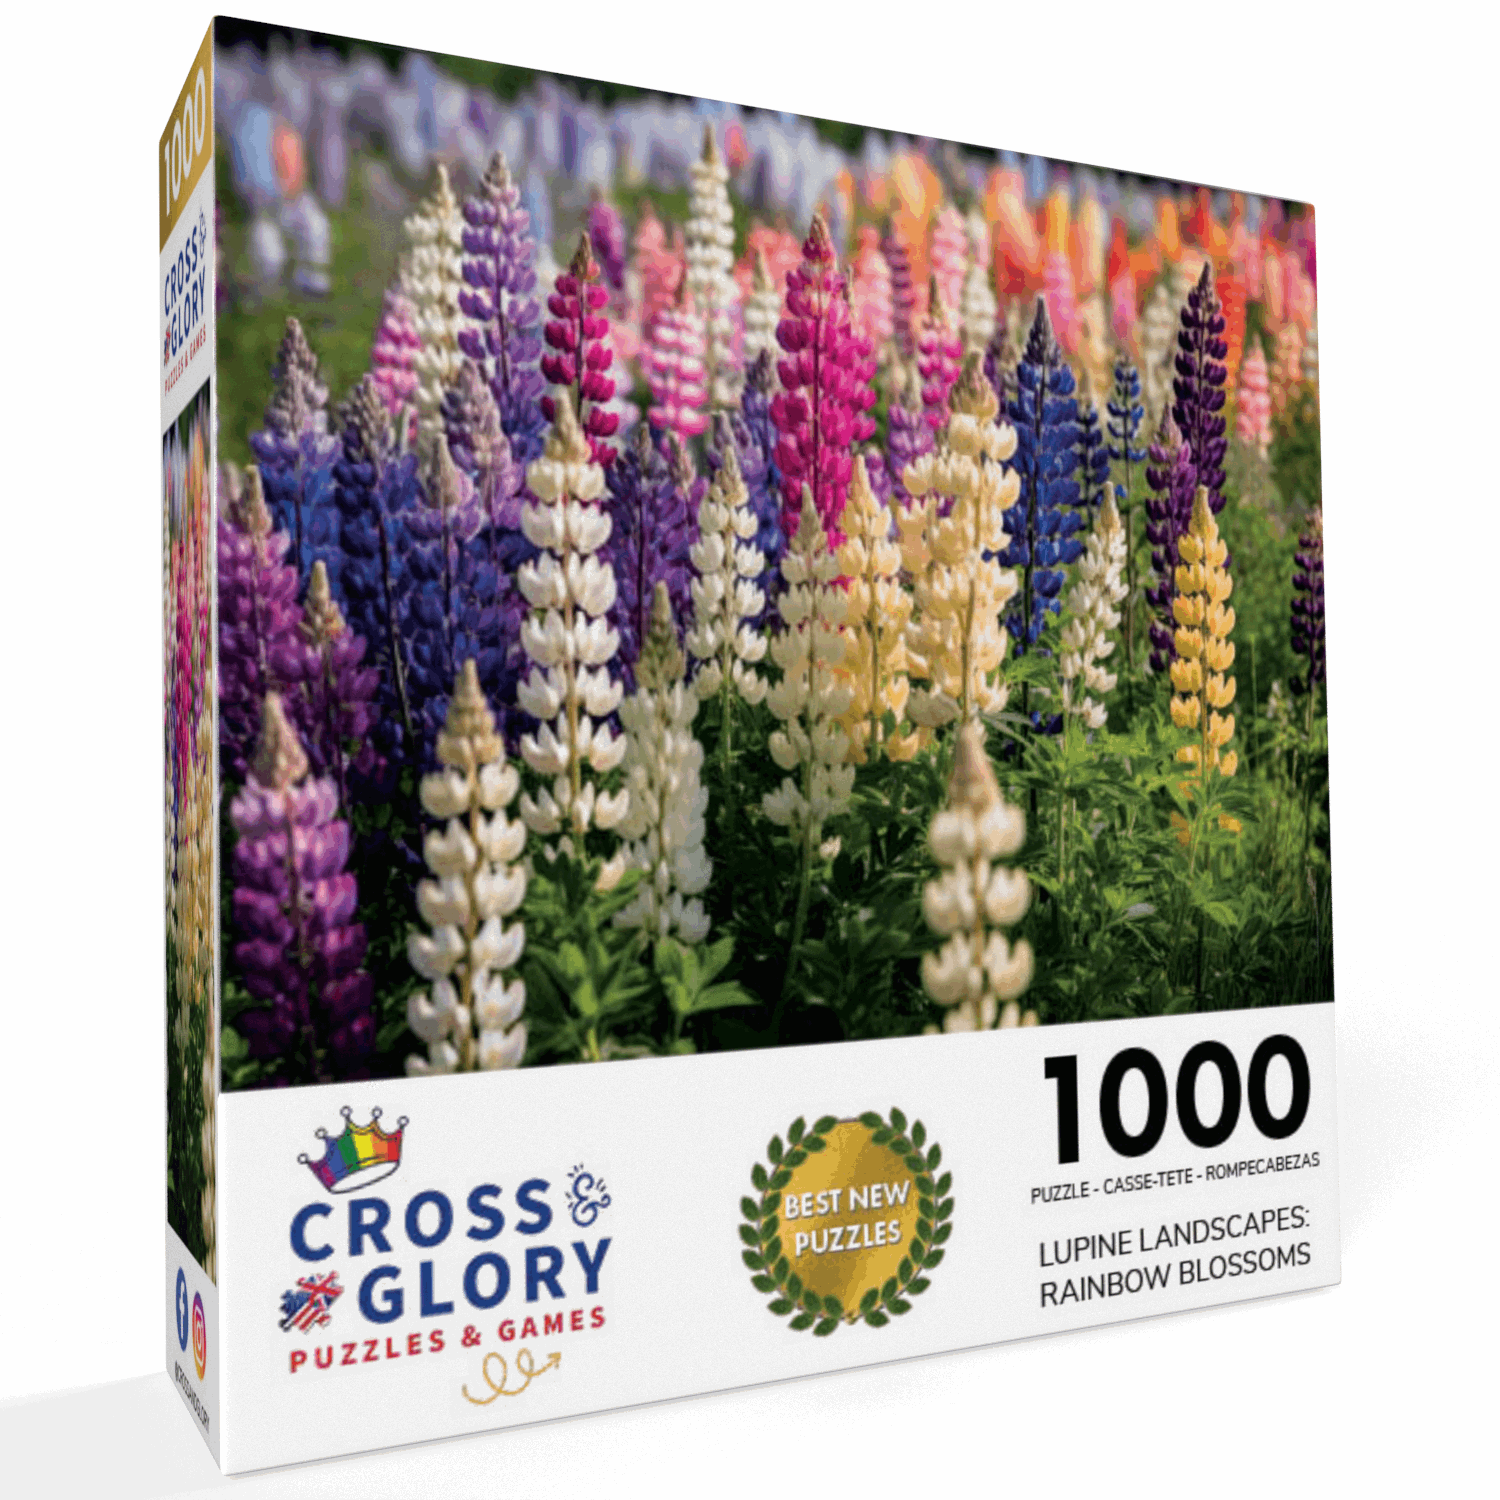 Lupine Landscapes: Rainbow Blossoms - 1000 Piece Jigsaw Puzzle